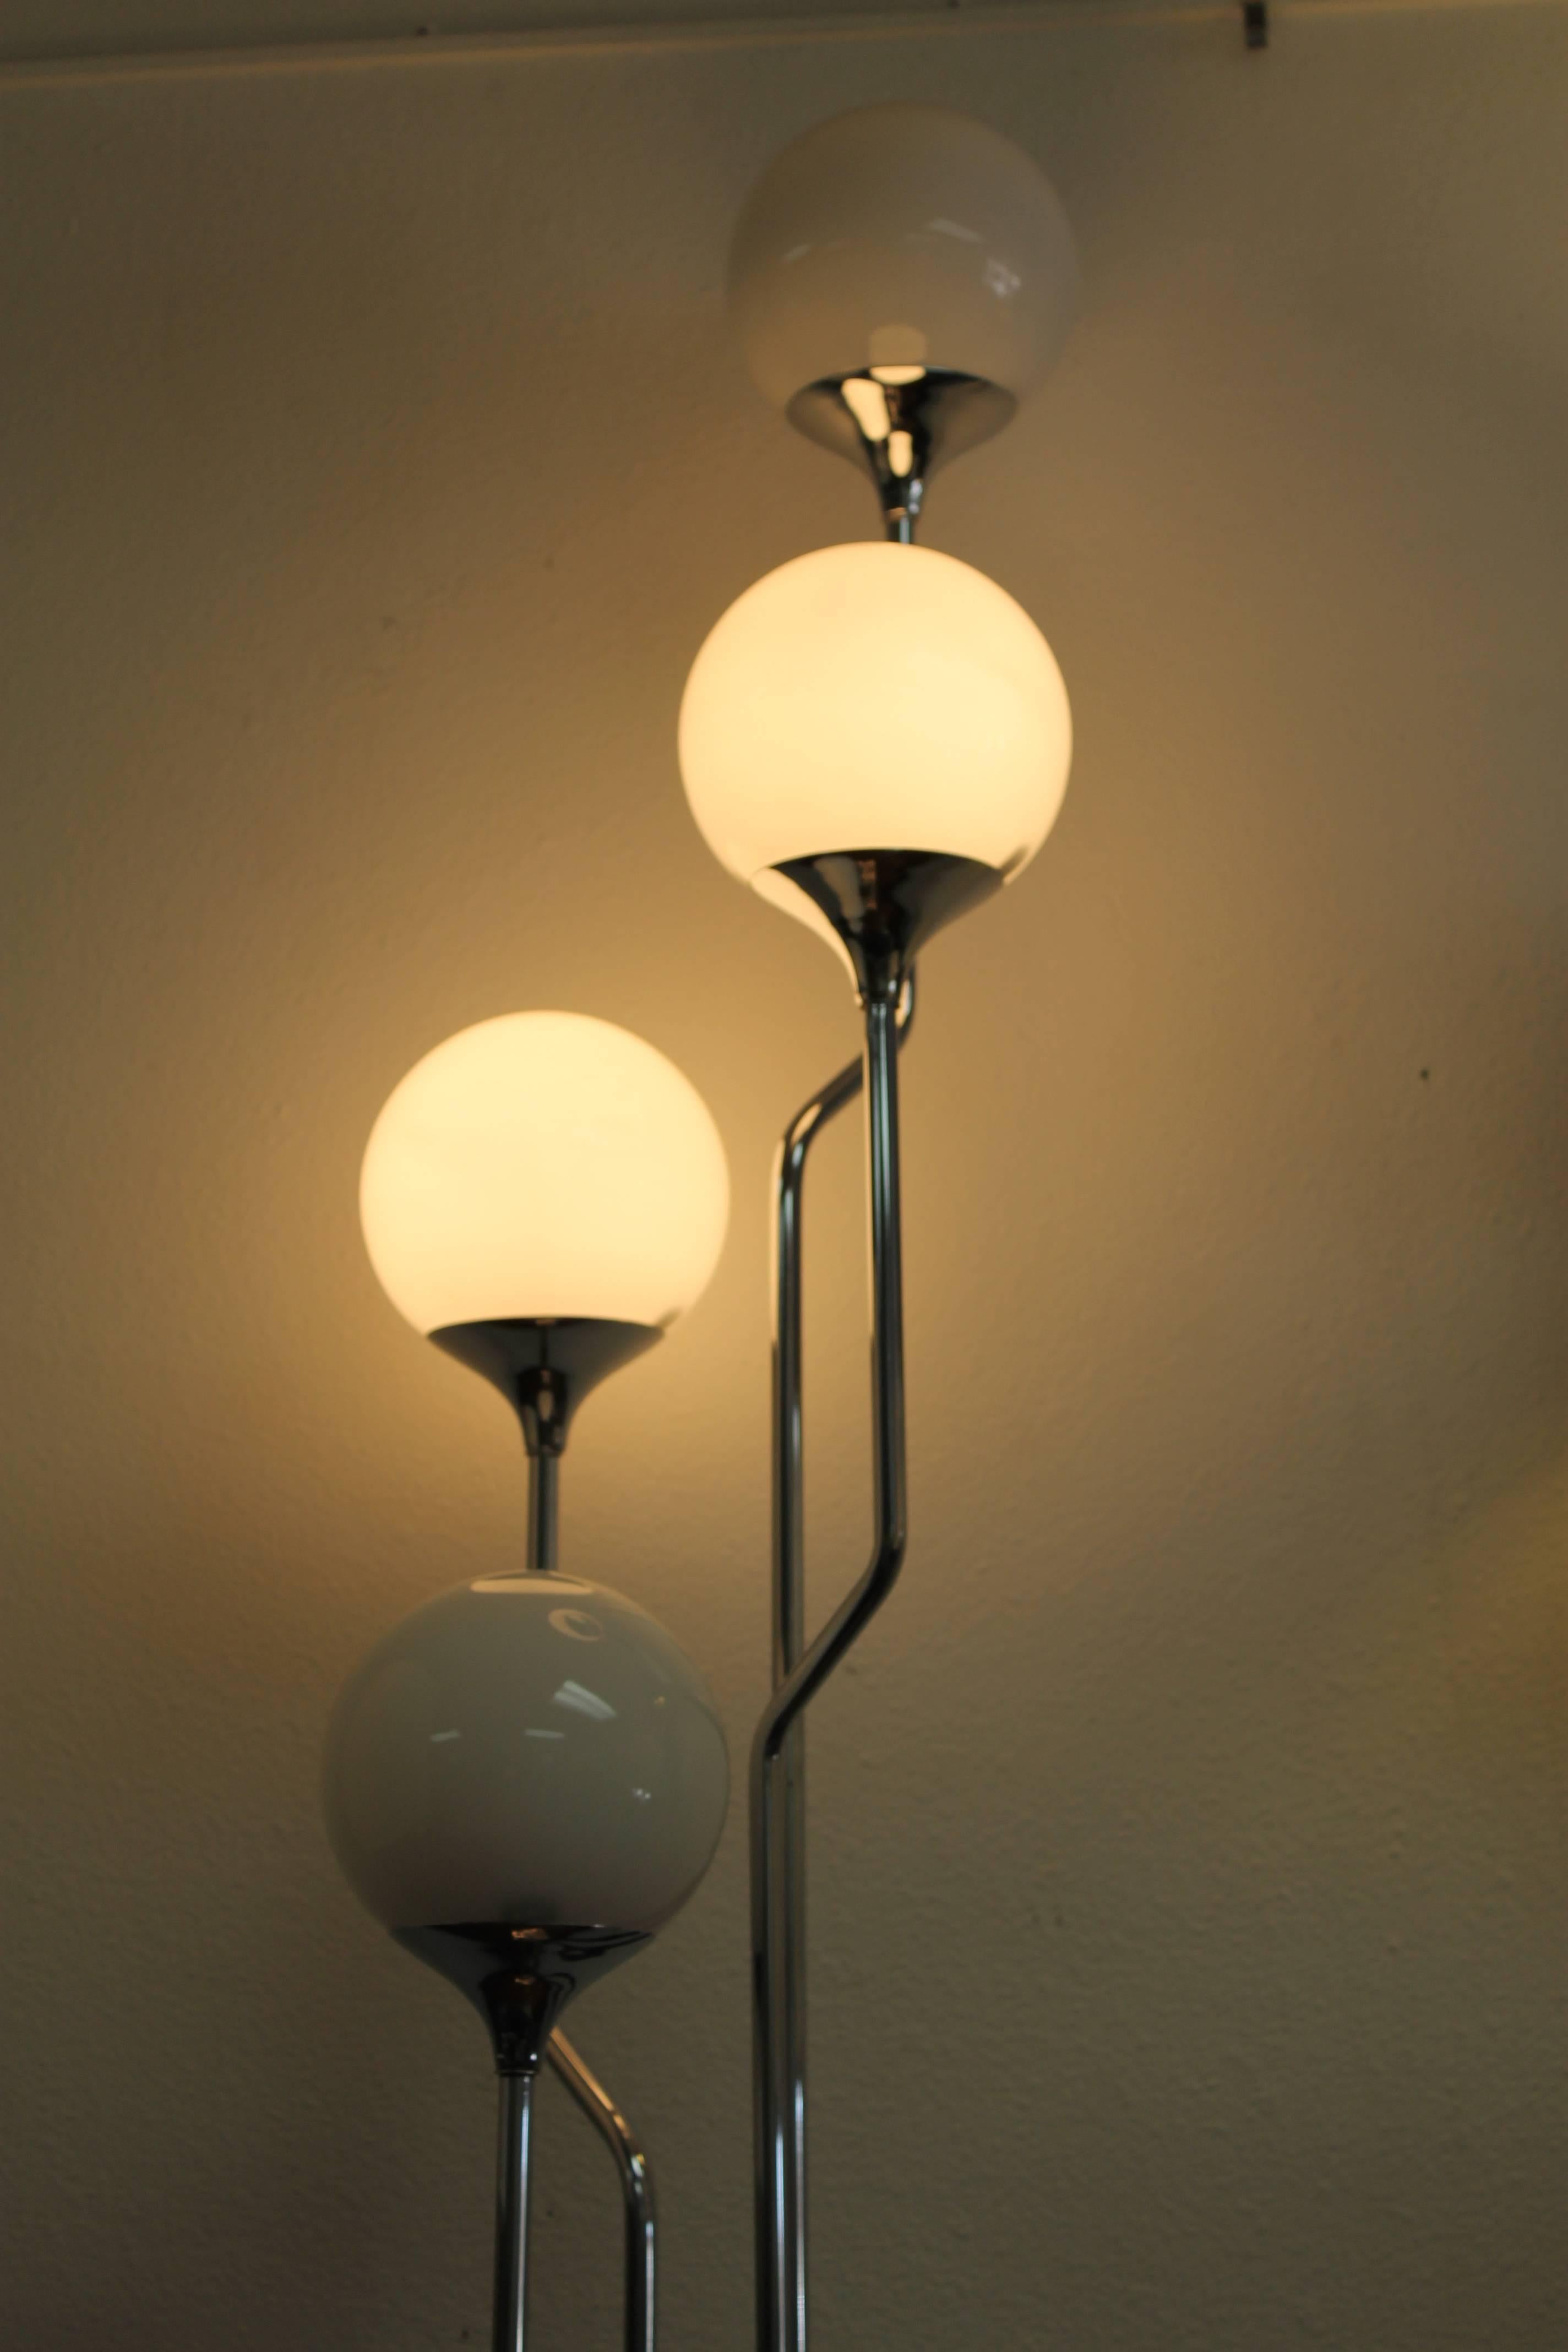 Chrome and four glass globes Italian floor lamp by Goffredo Reggiani. Measures 65